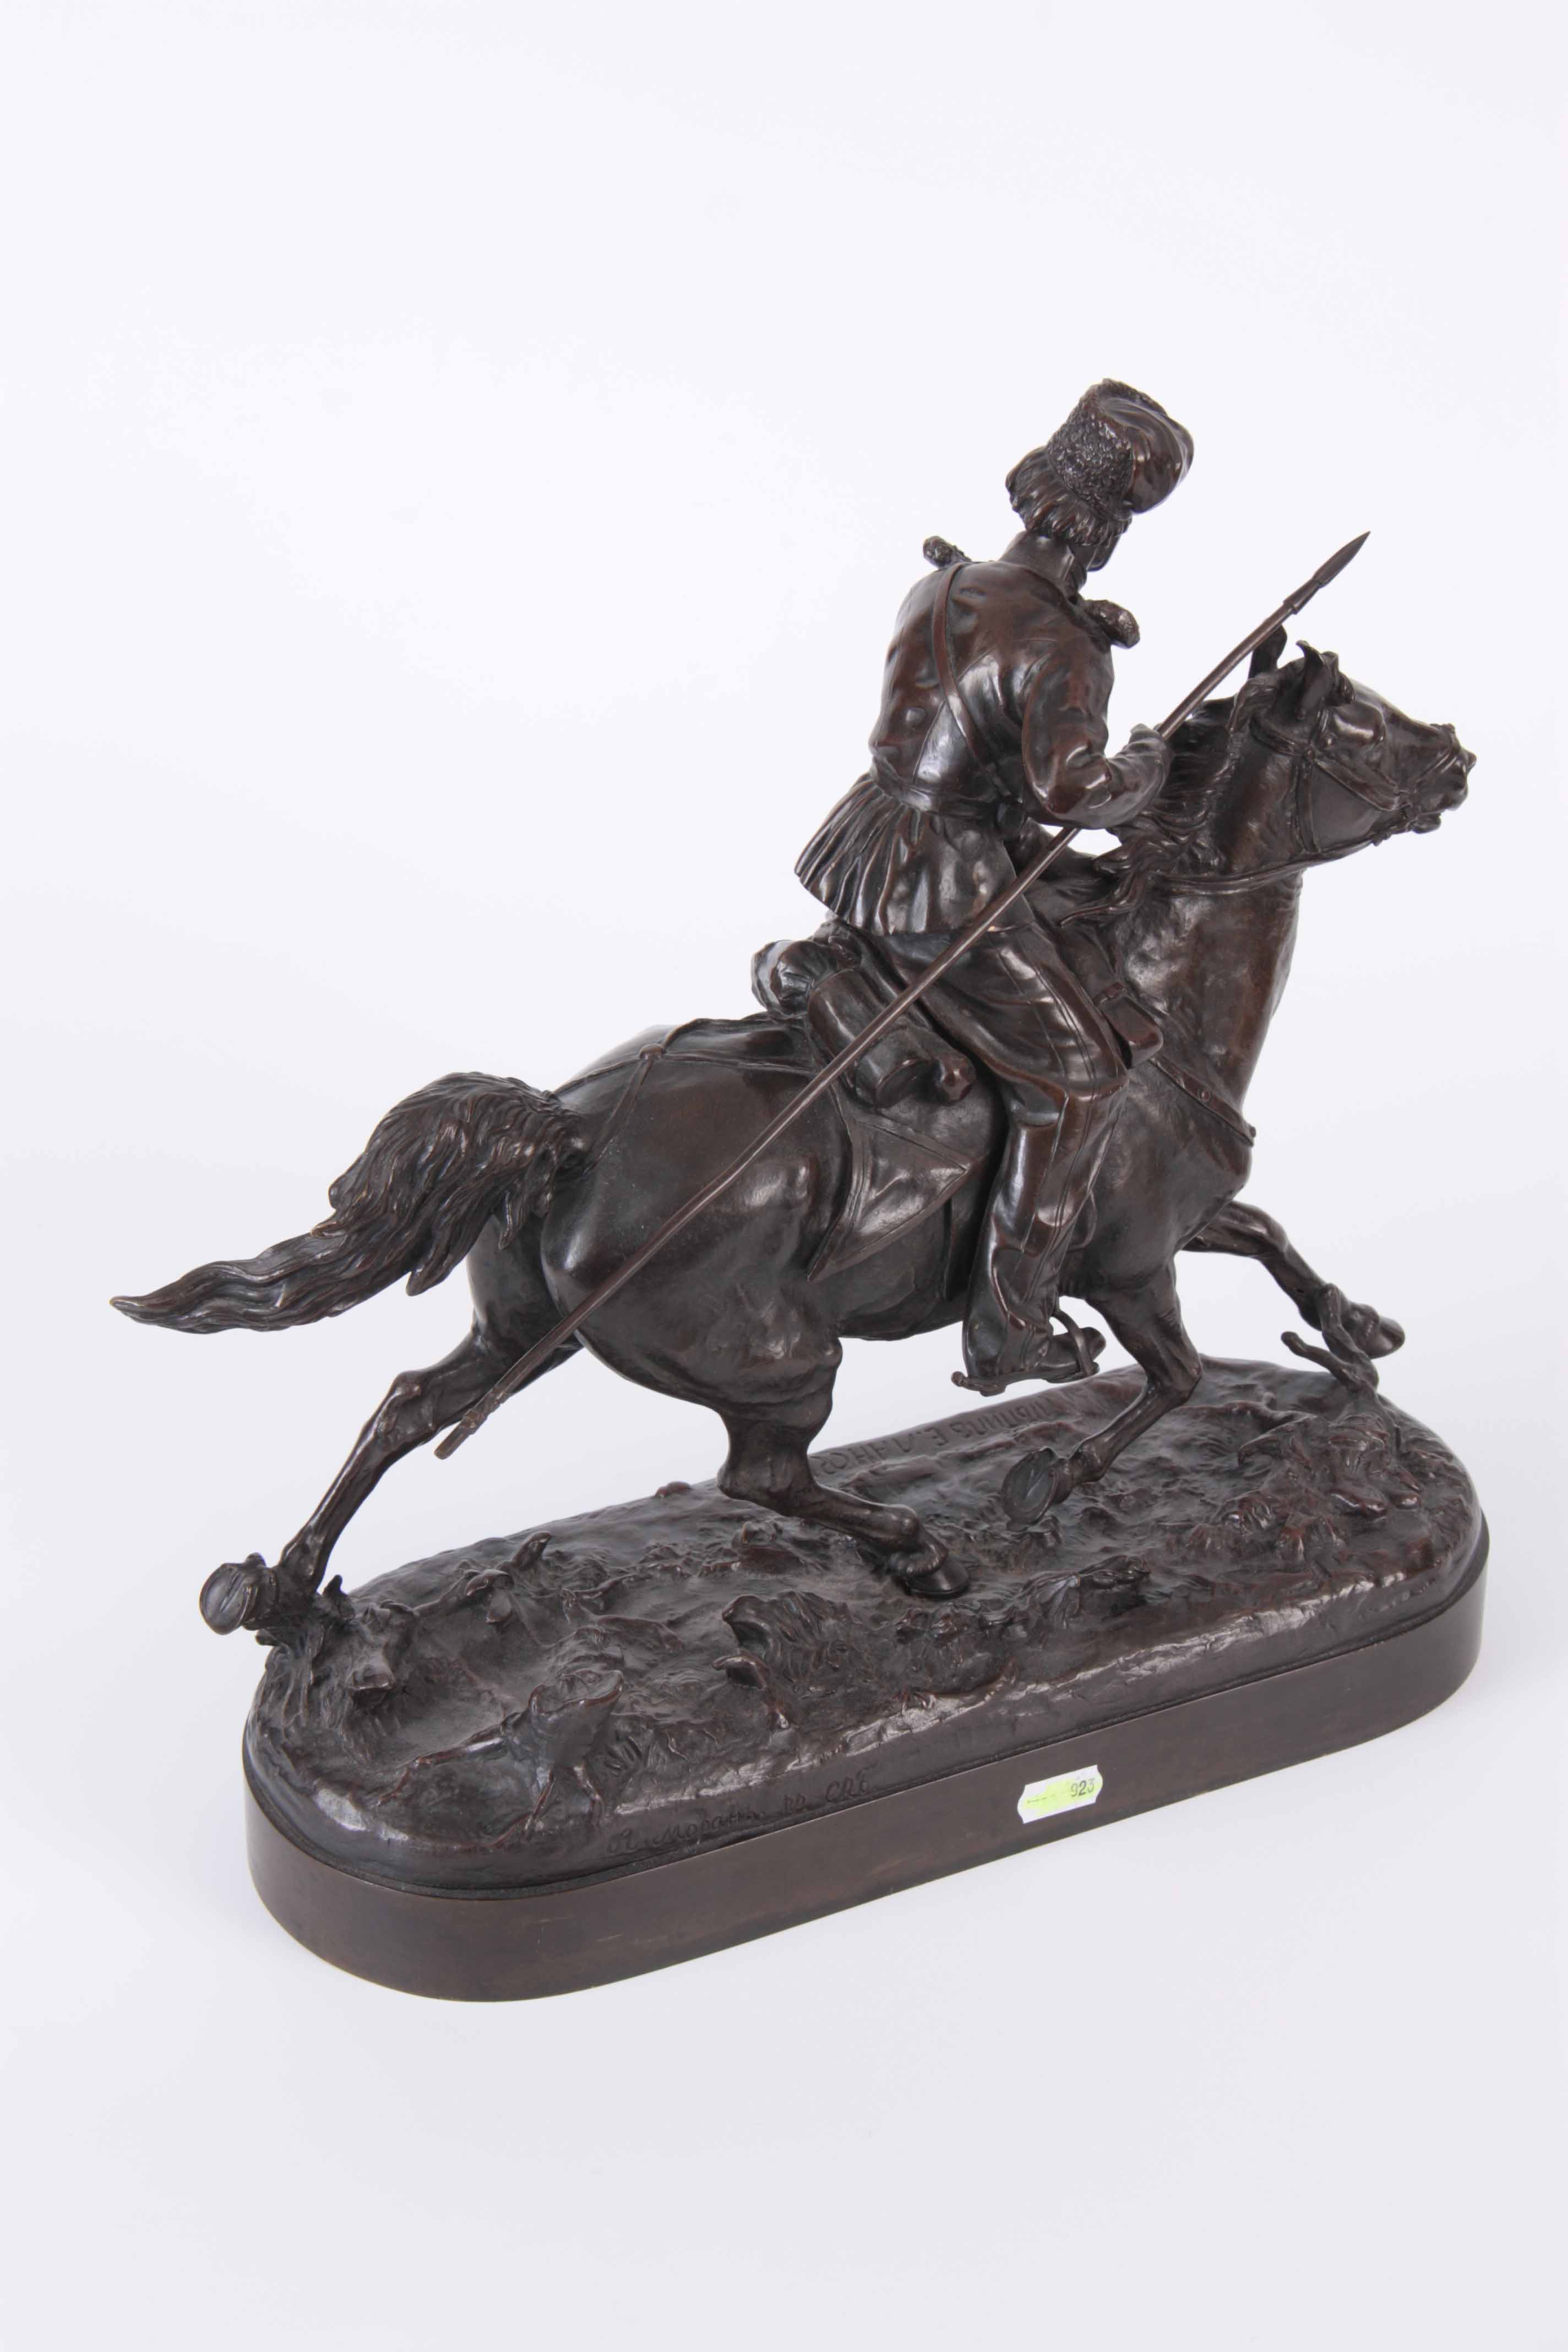 E. NAHCEPE. A LATE 19TH CENTURY RUSSIAN PATINATED BRONZE SCULPTURE modelled as a Cossack on charging - Image 8 of 8